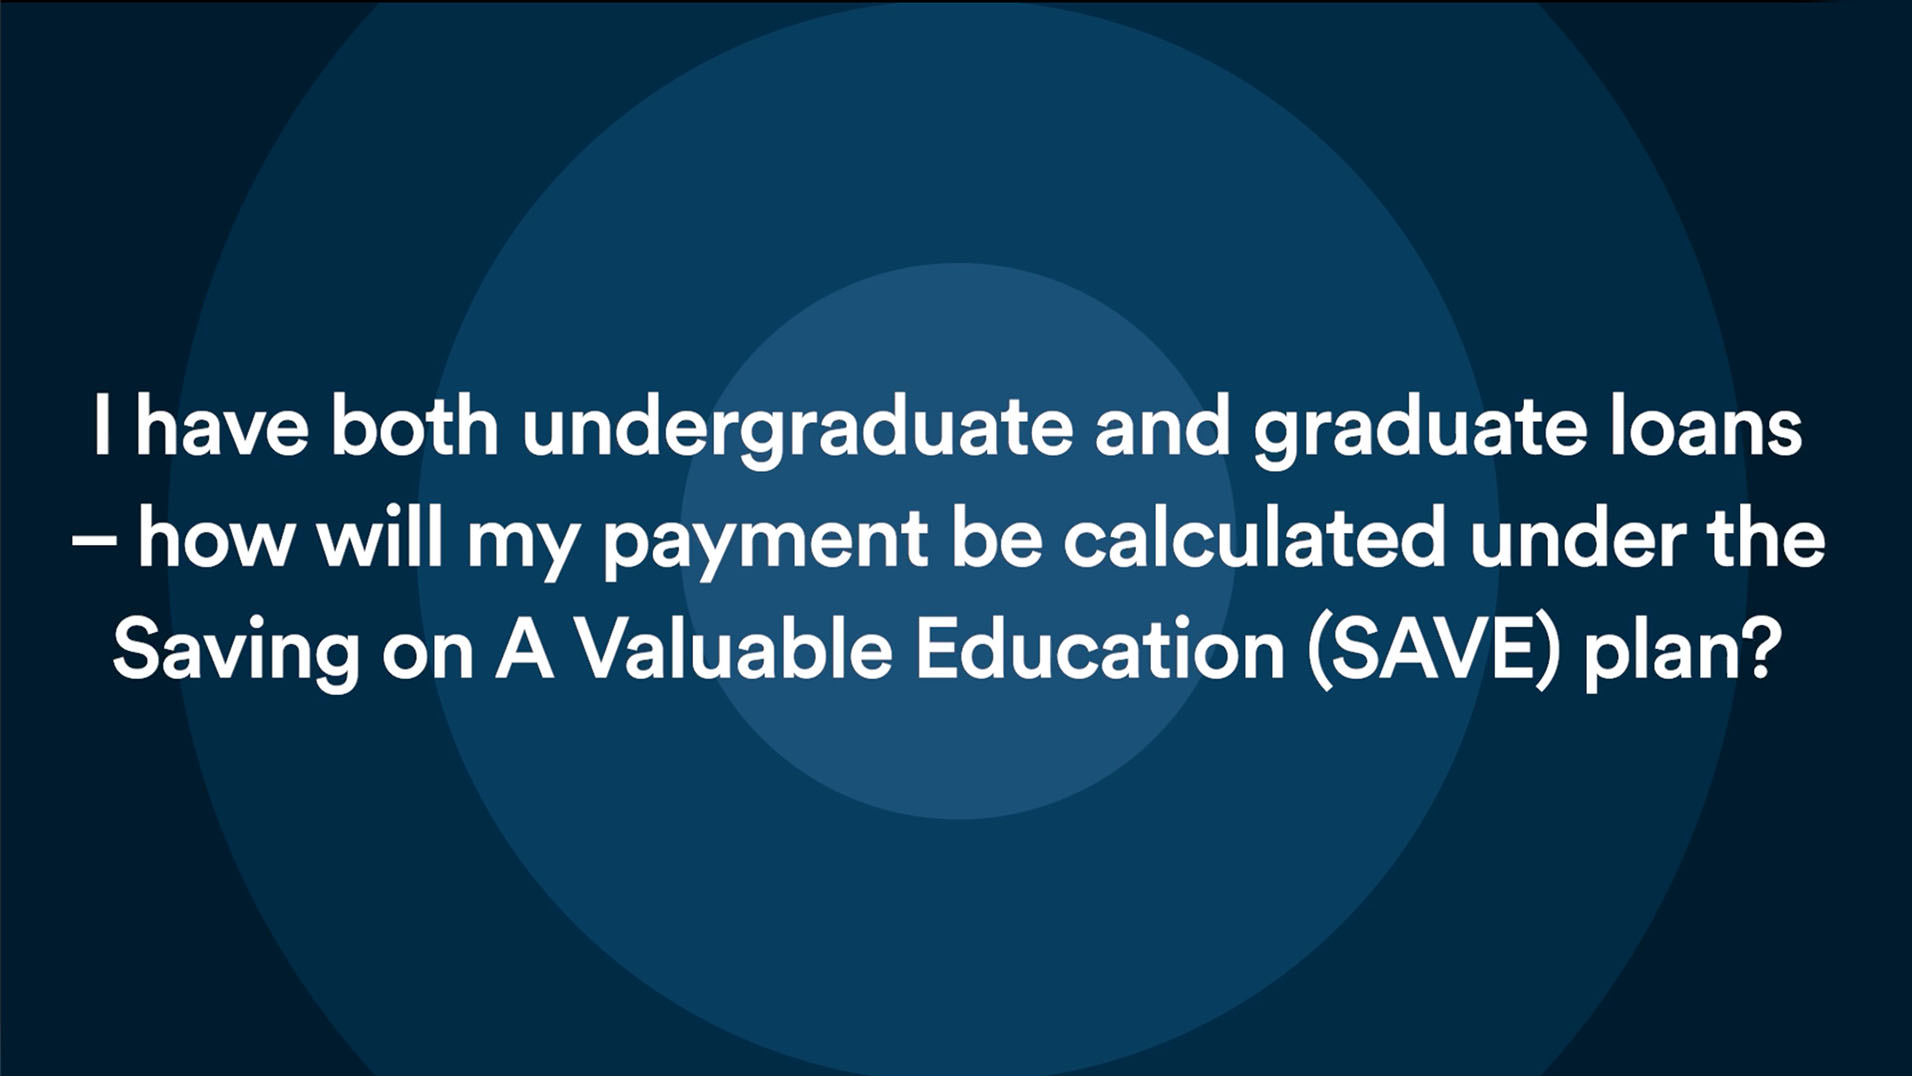 Calculate Monthly Payments Under SAVE Plan: for Graduate and Undergraduate Loans